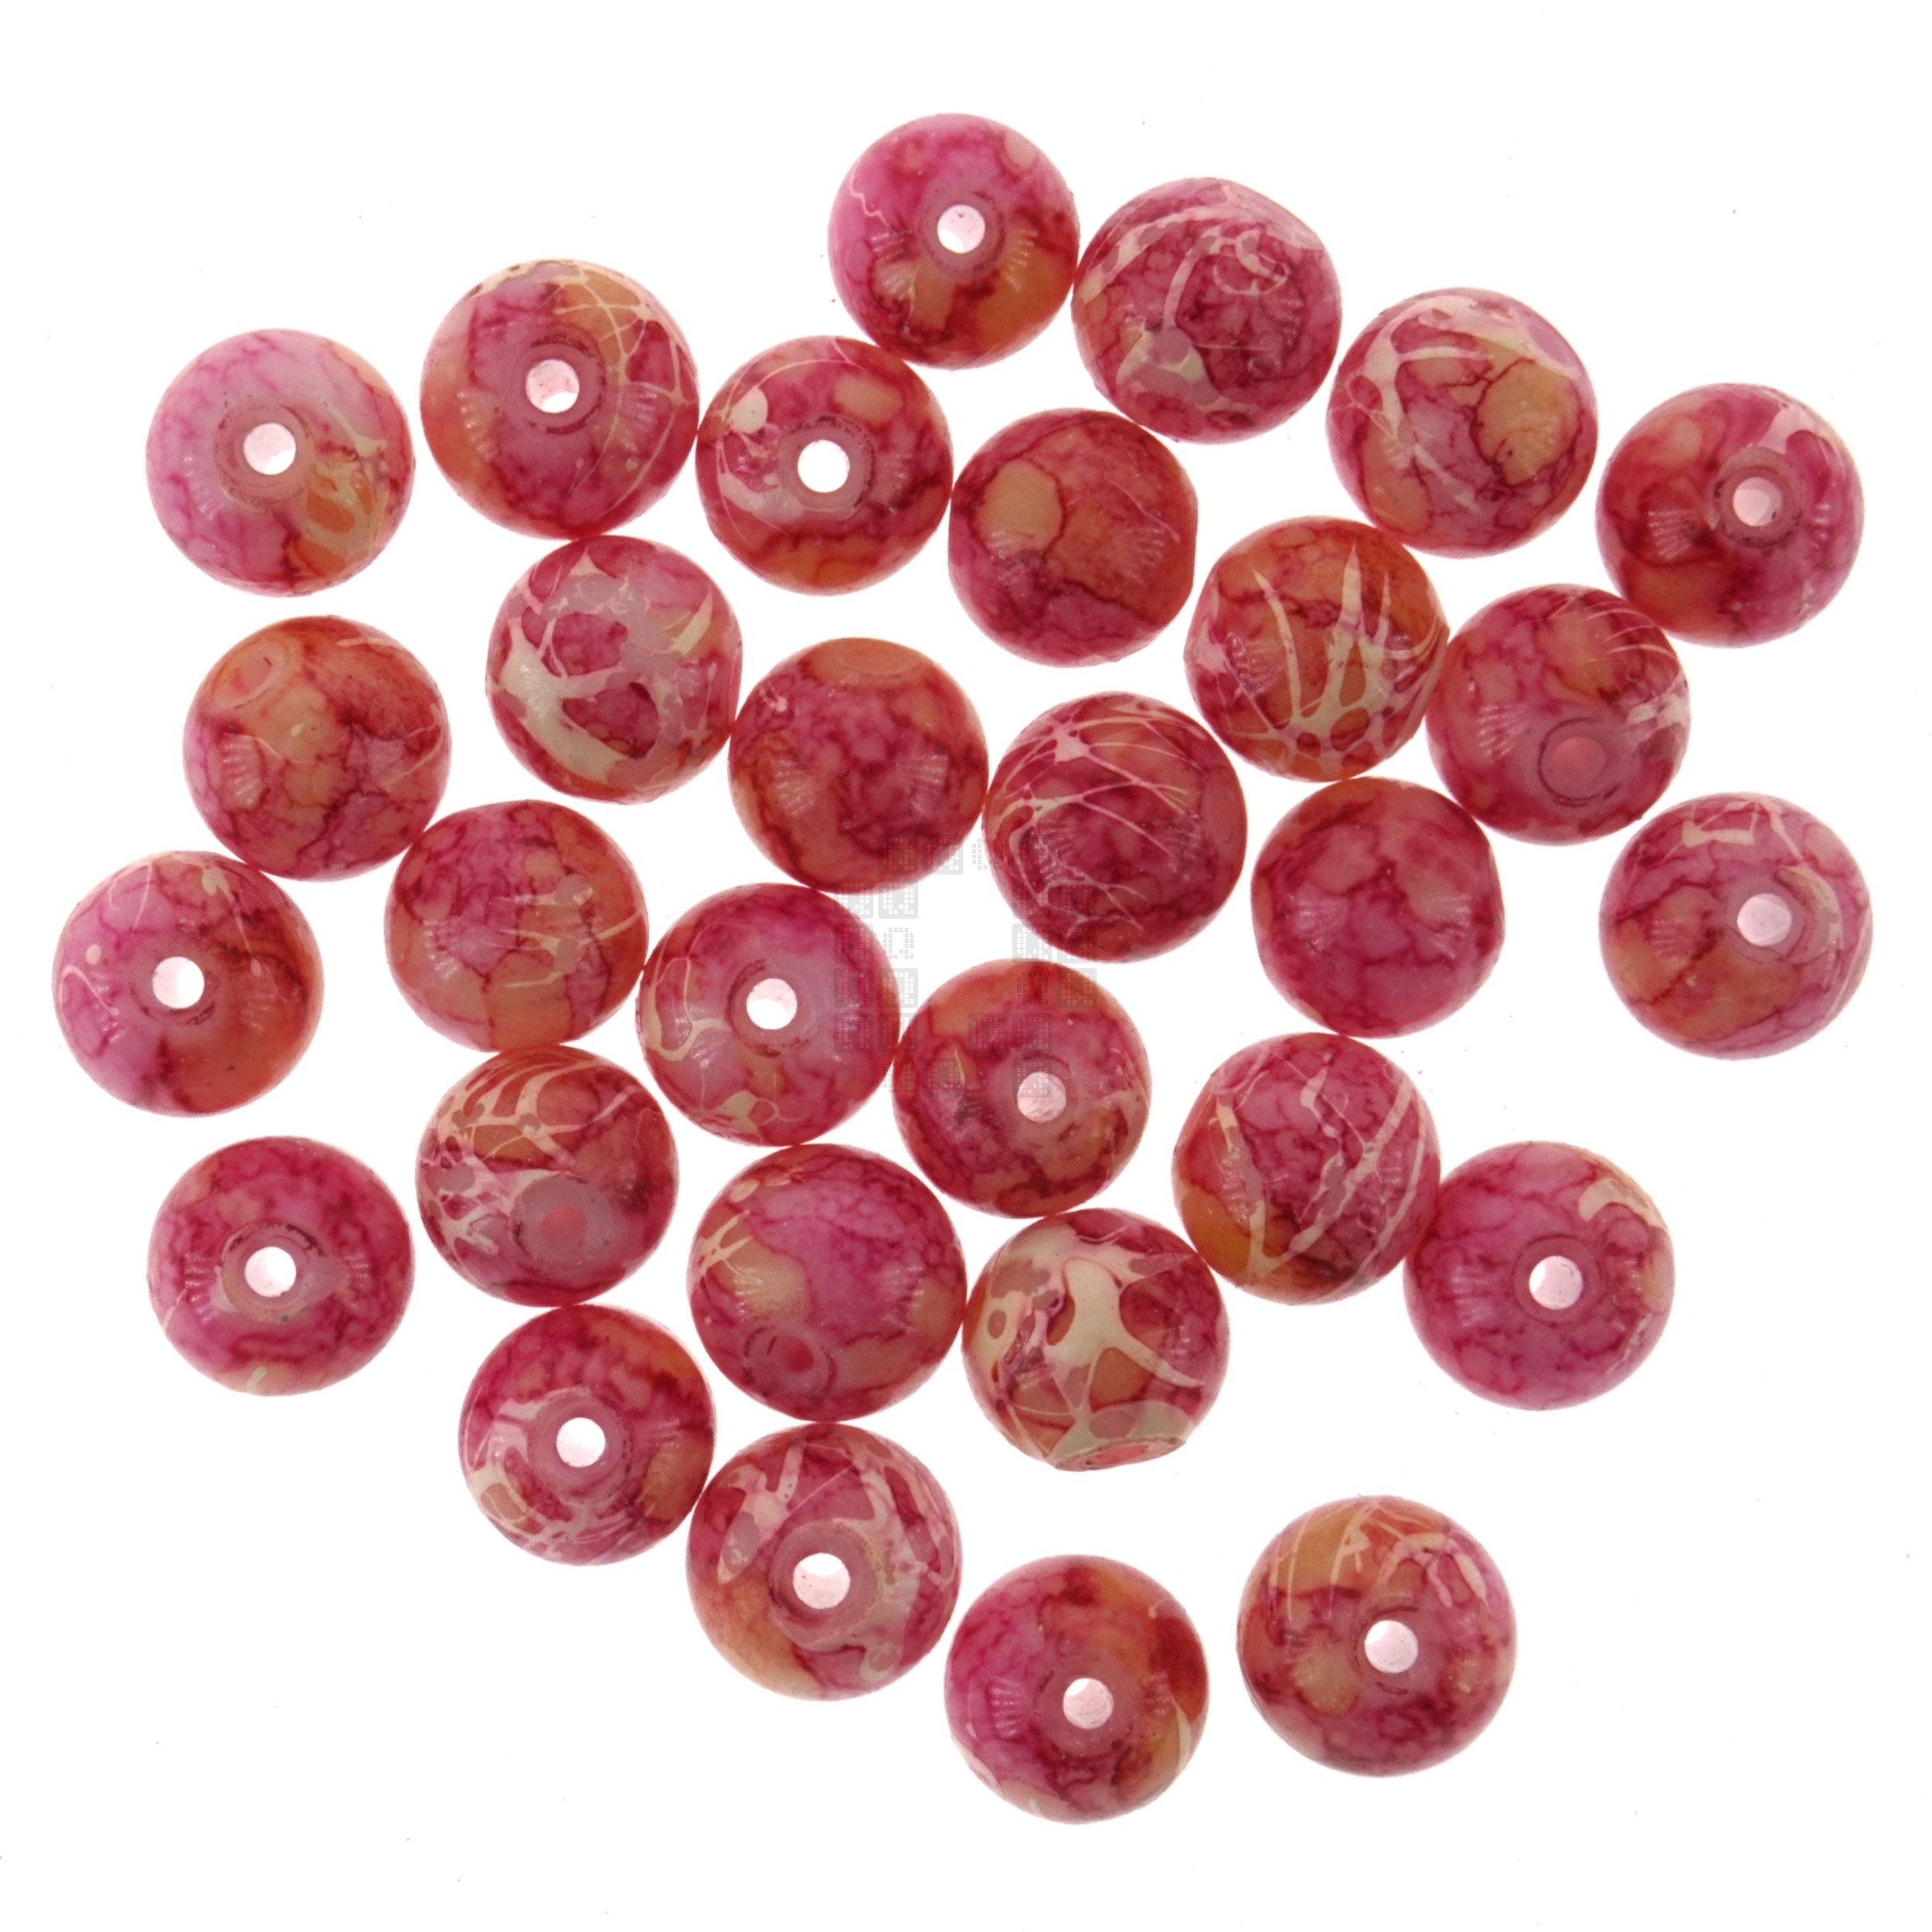 Pomegranate 8mm Loose Glass Beads, 30 Pieces